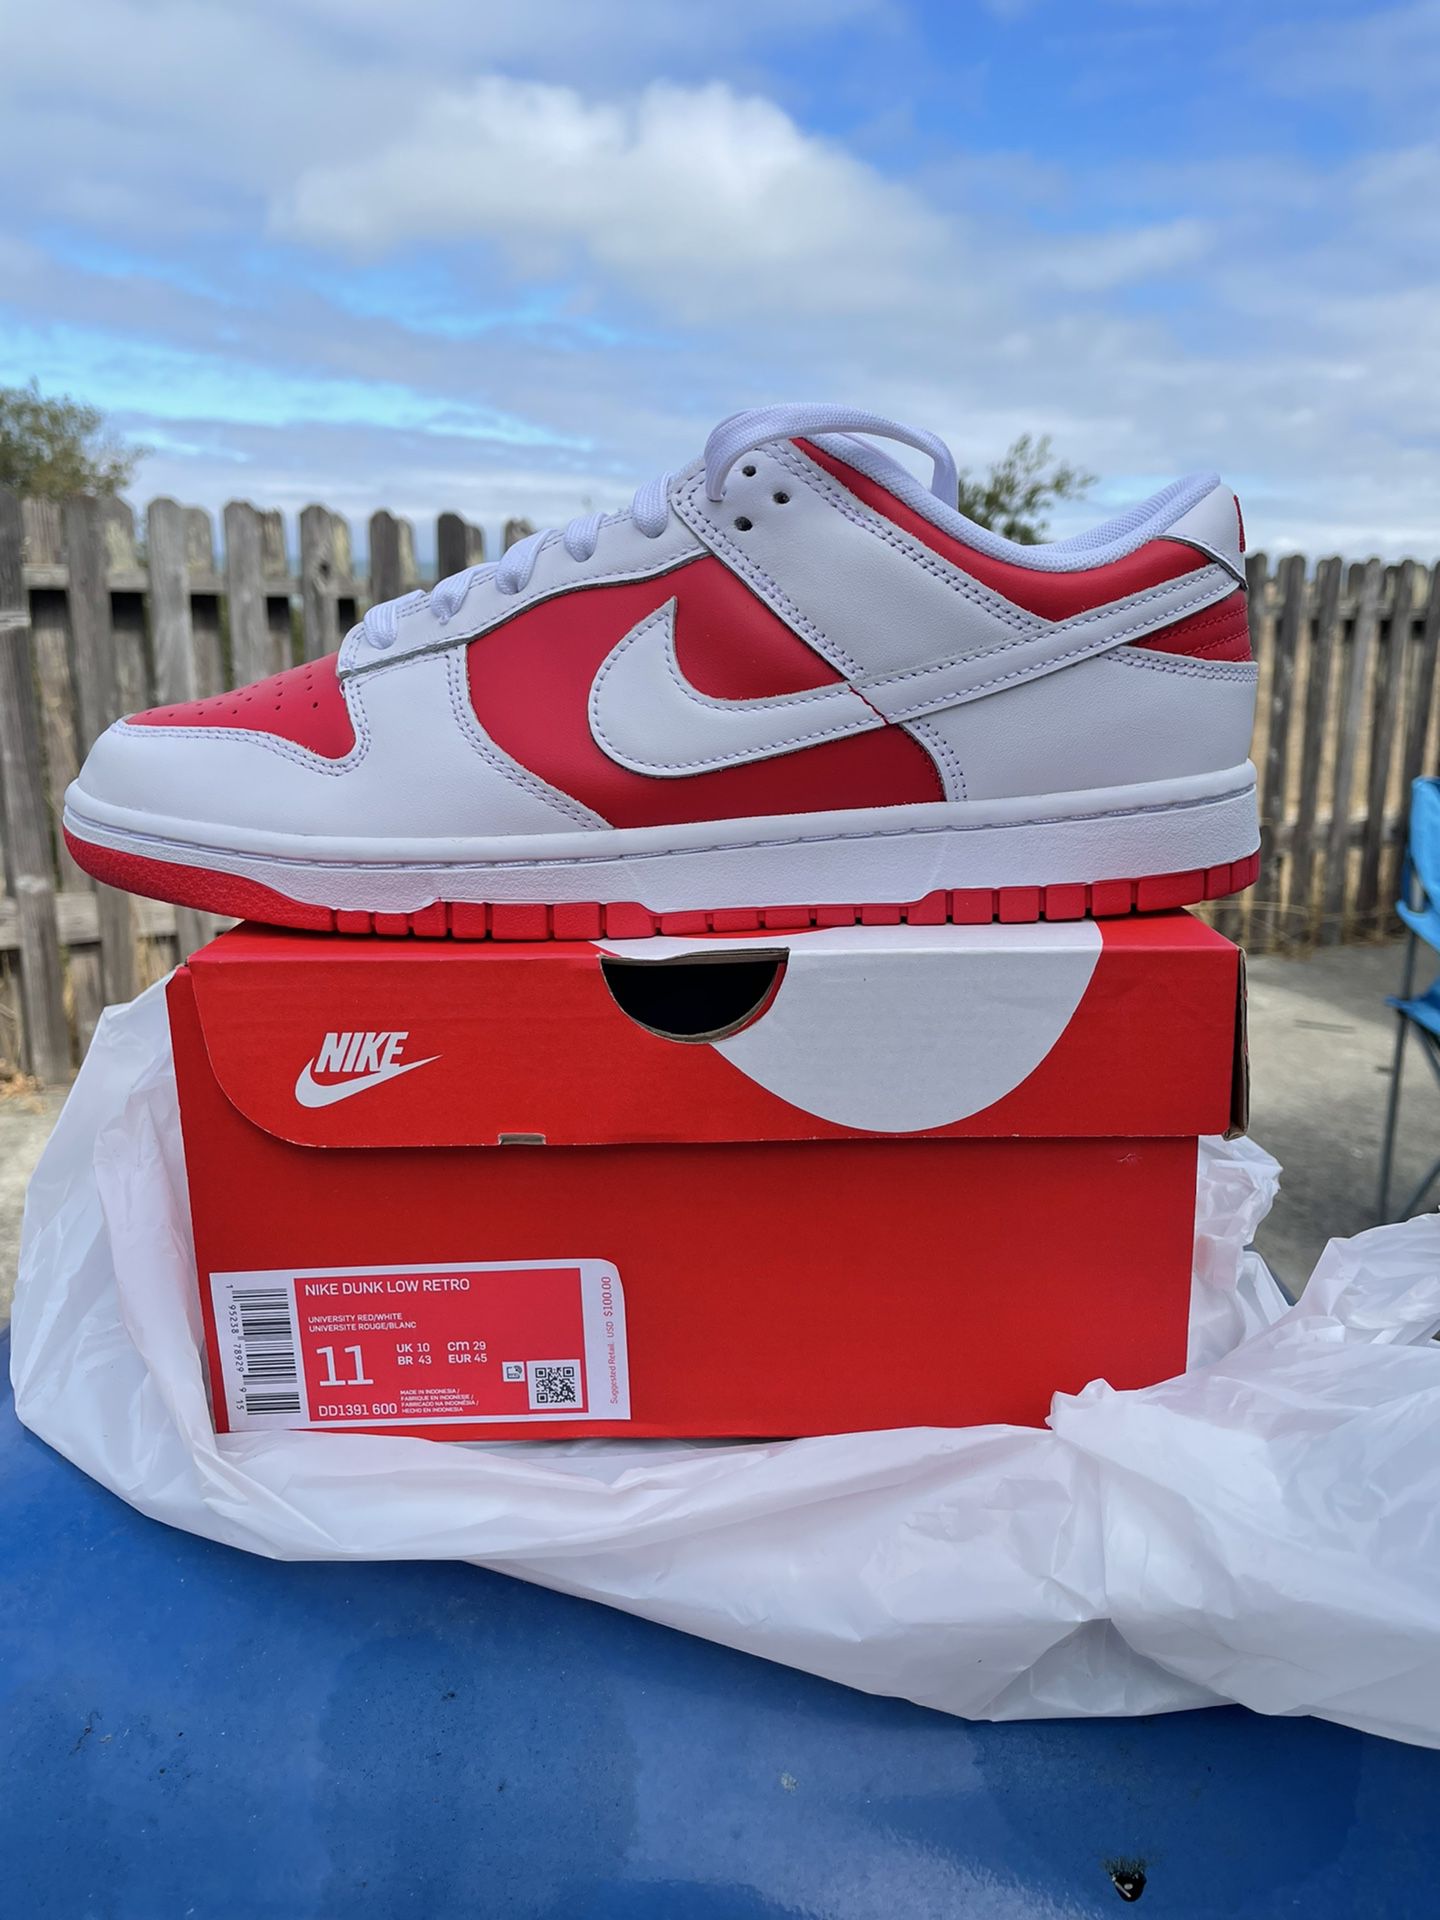 Nike Dunk Low “Championship Red” Size 11